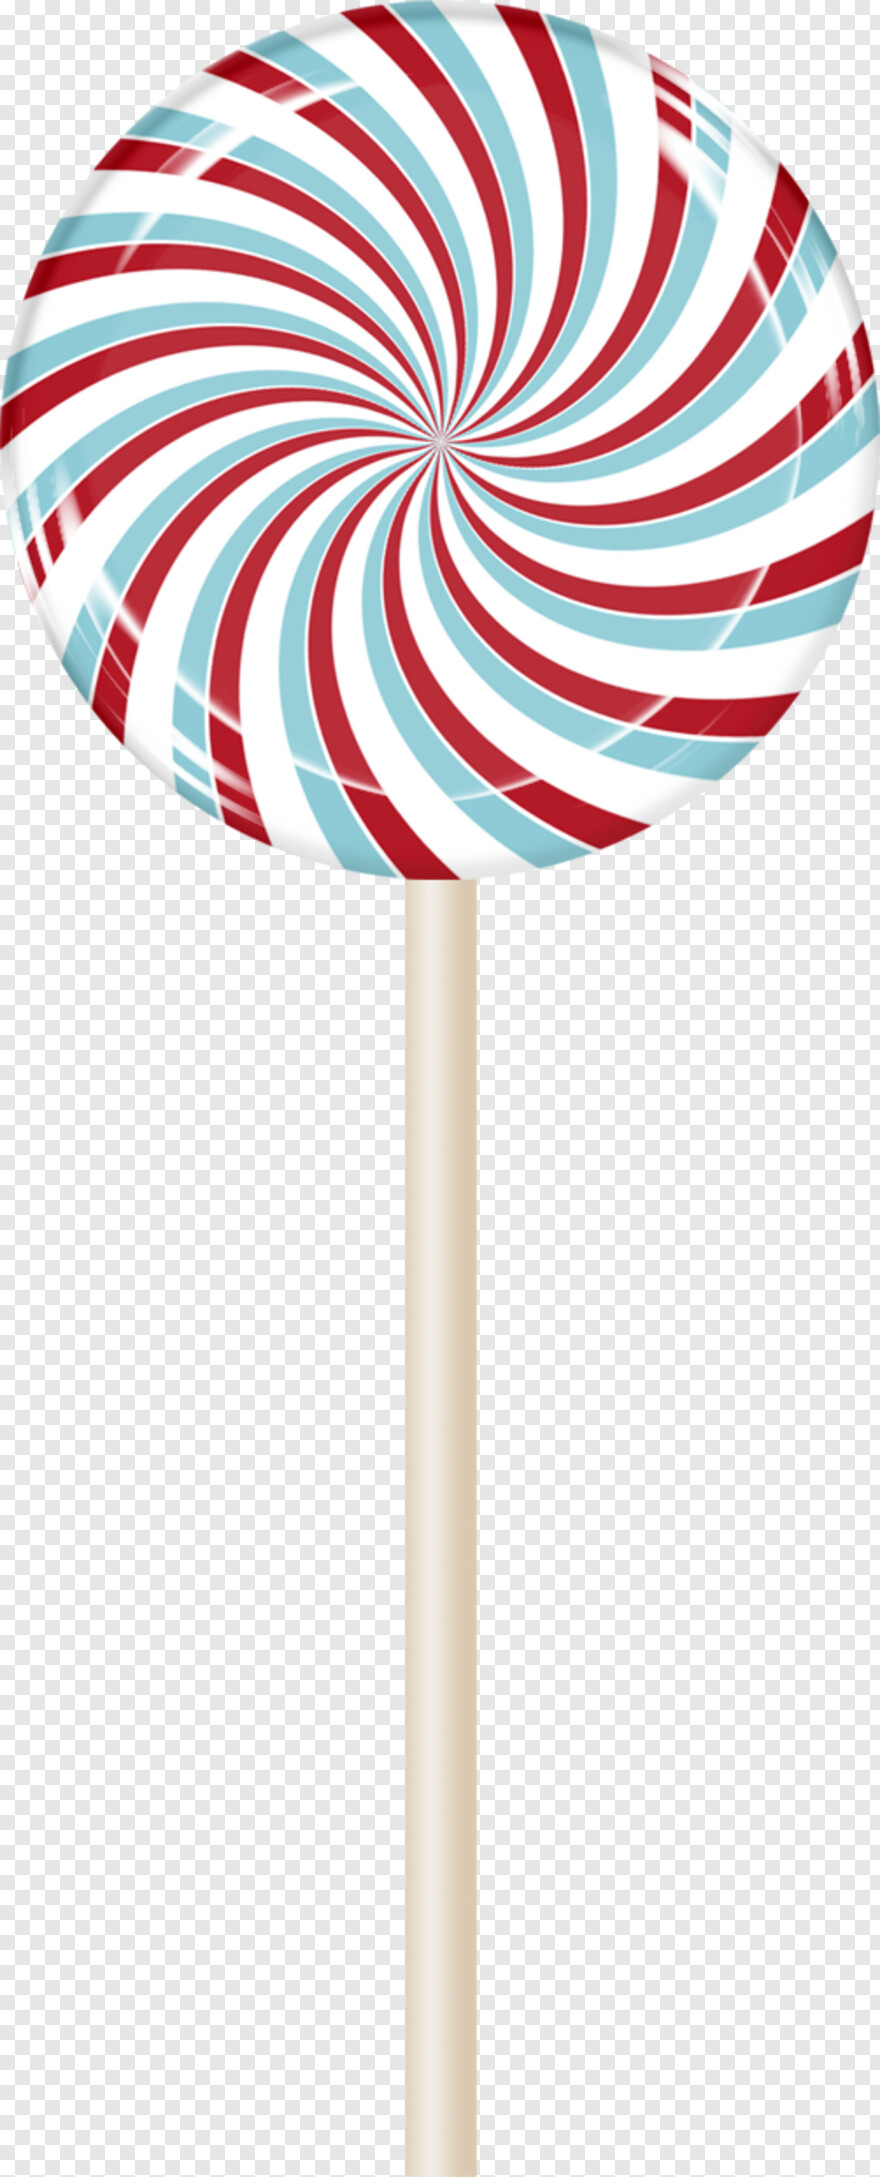 candy-cane # 1073847